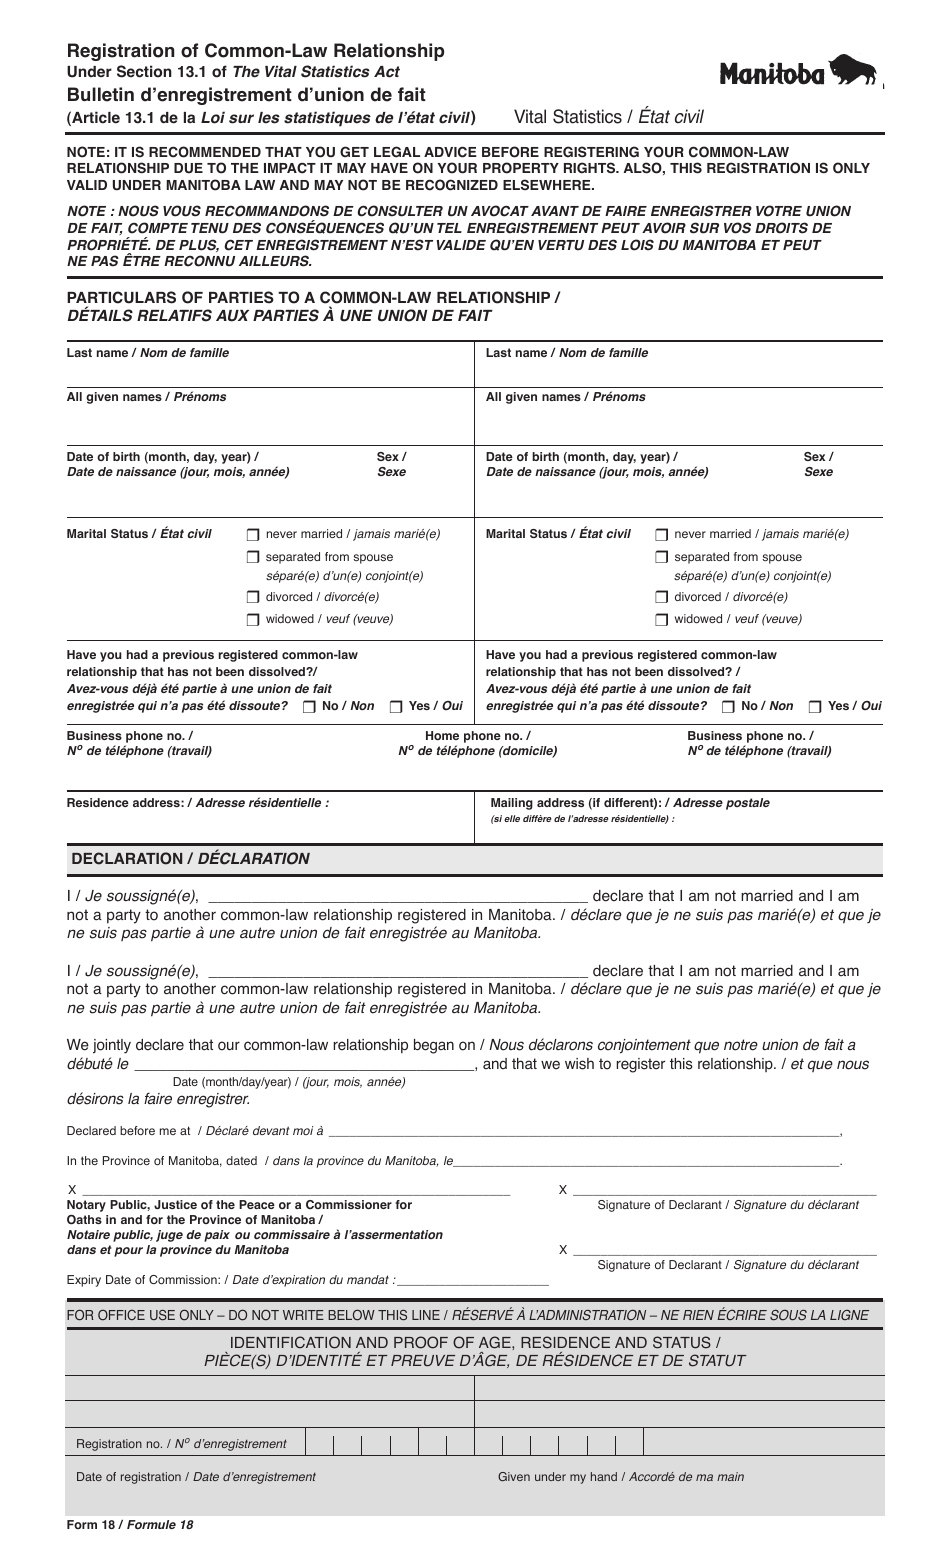 Form 18 Registration of Common-Law Relationship - Manitoba, Canada (English / French), Page 1